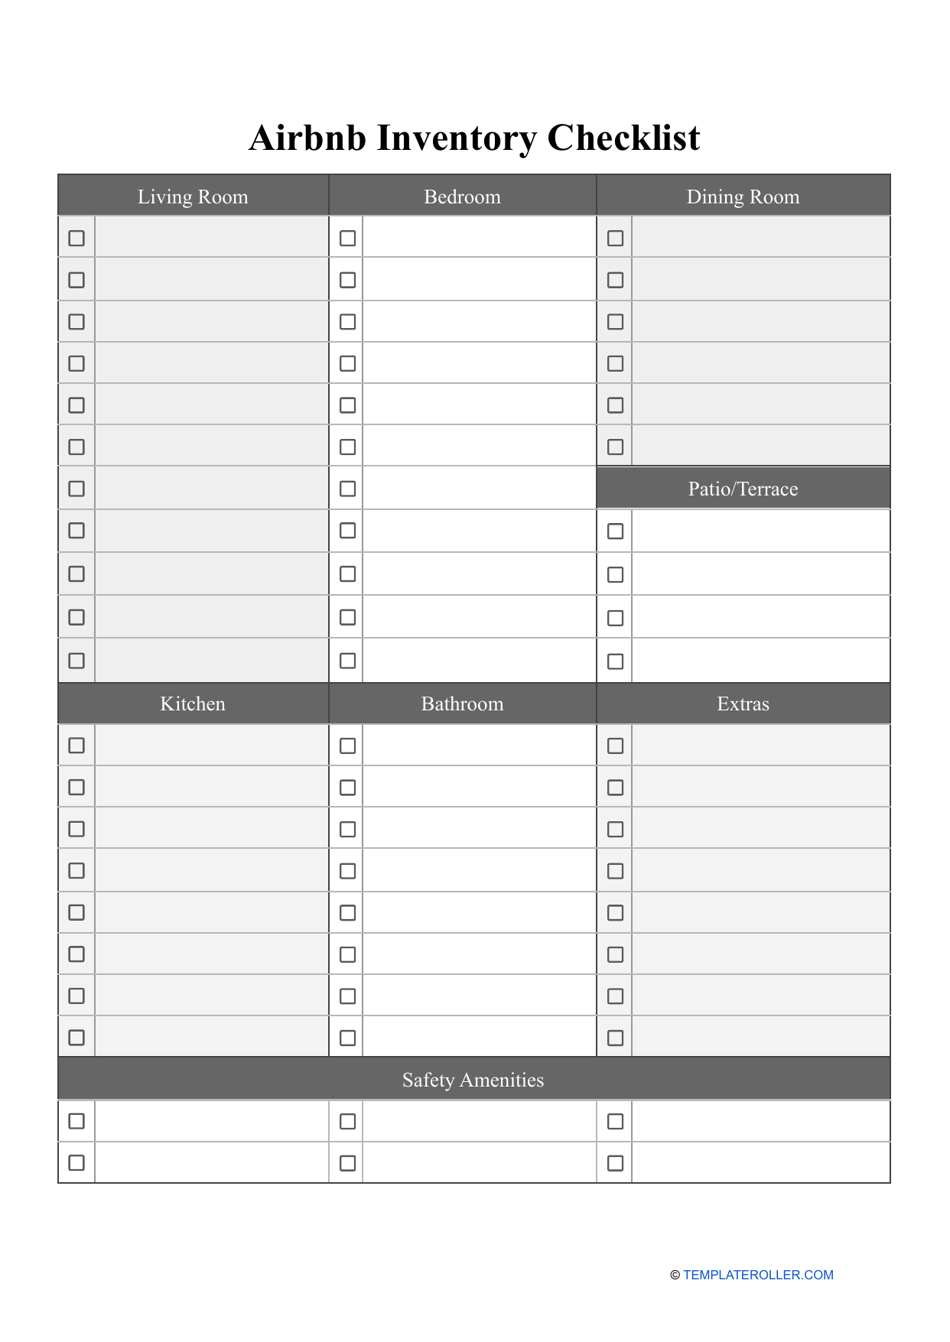 Airbnb Inventory Checklist Template Fill Out, Sign Online and